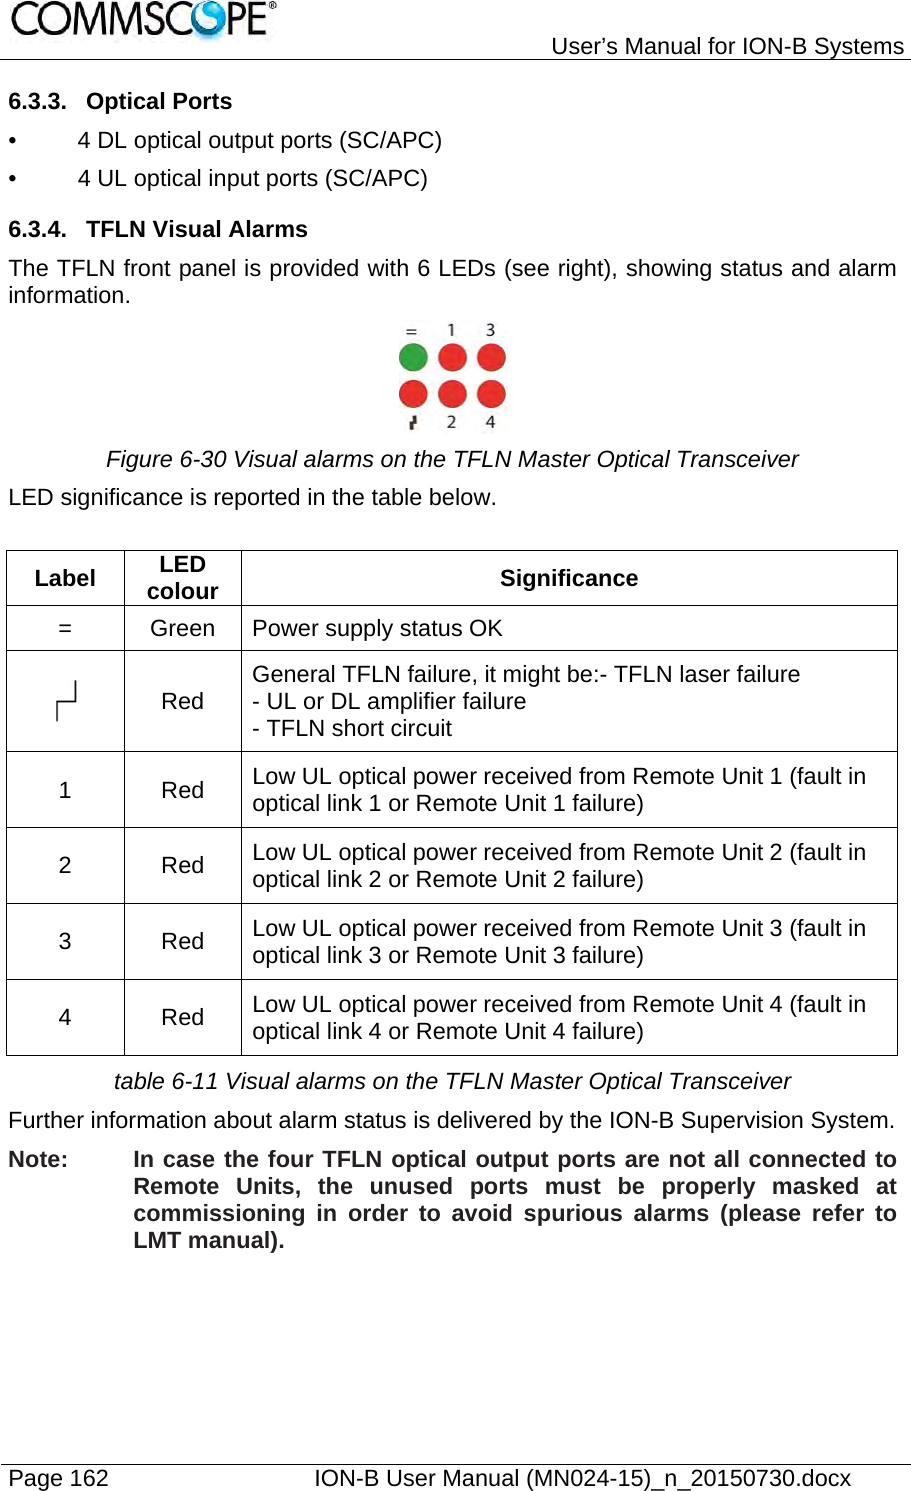   User’s Manual for ION-B Systems Page 162    ION-B User Manual (MN024-15)_n_20150730.docx  6.3.3. Optical Ports •  4 DL optical output ports (SC/APC) •  4 UL optical input ports (SC/APC)  6.3.4.  TFLN Visual Alarms The TFLN front panel is provided with 6 LEDs (see right), showing status and alarm information.  Figure 6-30 Visual alarms on the TFLN Master Optical Transceiver LED significance is reported in the table below.  Label  LED colour  Significance =  Green  Power supply status OK  Red  General TFLN failure, it might be:- TFLN laser failure - UL or DL amplifier failure - TFLN short circuit 1 Red Low UL optical power received from Remote Unit 1 (fault in optical link 1 or Remote Unit 1 failure) 2 Red Low UL optical power received from Remote Unit 2 (fault in optical link 2 or Remote Unit 2 failure) 3 Red Low UL optical power received from Remote Unit 3 (fault in optical link 3 or Remote Unit 3 failure) 4 Red Low UL optical power received from Remote Unit 4 (fault in optical link 4 or Remote Unit 4 failure) table 6-11 Visual alarms on the TFLN Master Optical Transceiver Further information about alarm status is delivered by the ION-B Supervision System. Note:  In case the four TFLN optical output ports are not all connected to Remote Units, the unused ports must be properly masked at commissioning in order to avoid spurious alarms (please refer to LMT manual). 